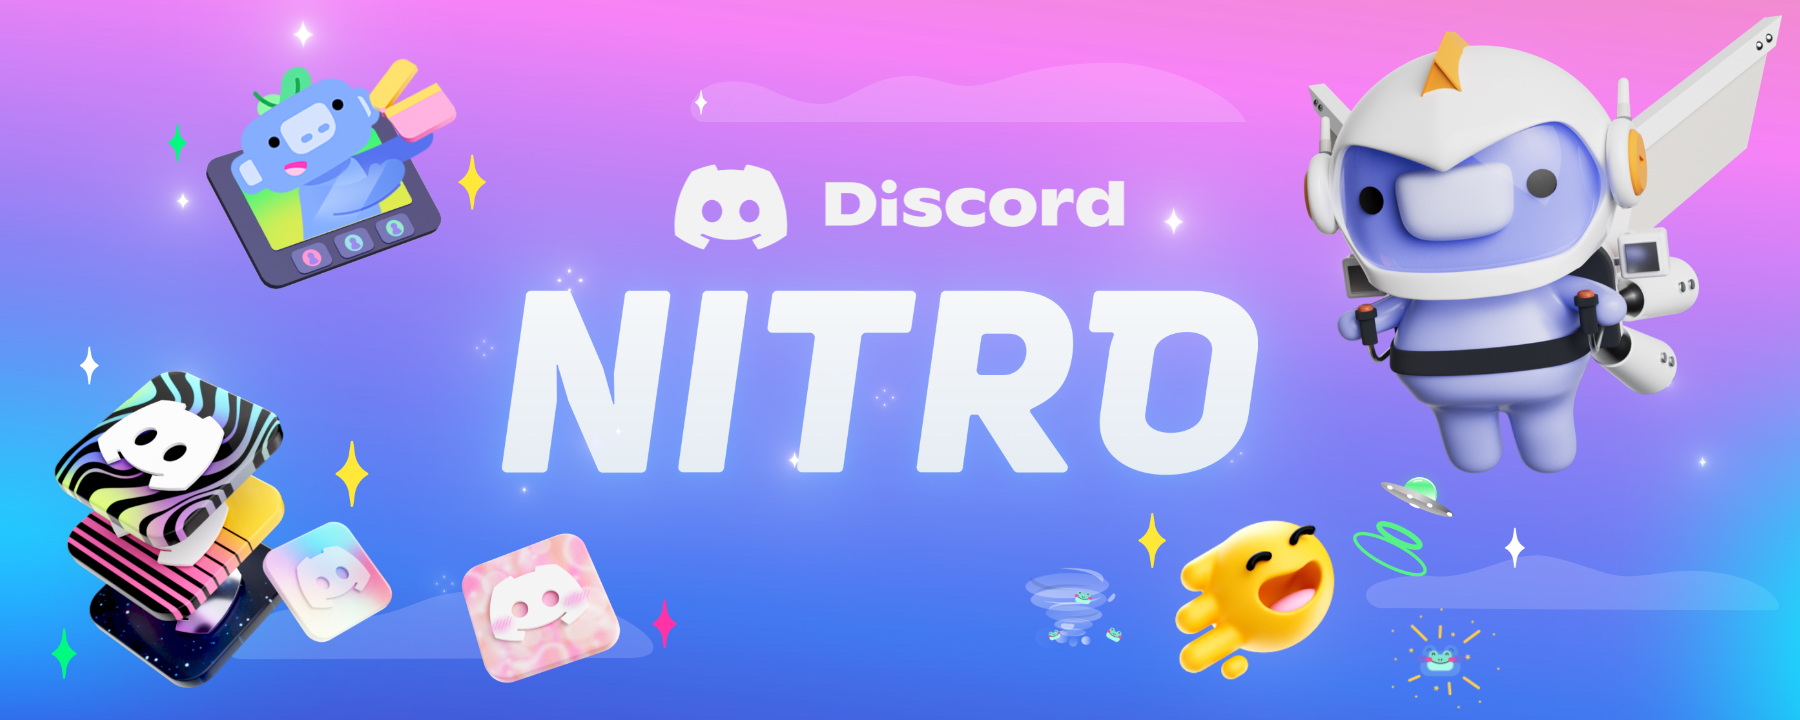 “Discord Nitro” logo plus Nitro Wumpus and other Nitro features like Super Reactions, Clips, and custom app icons.